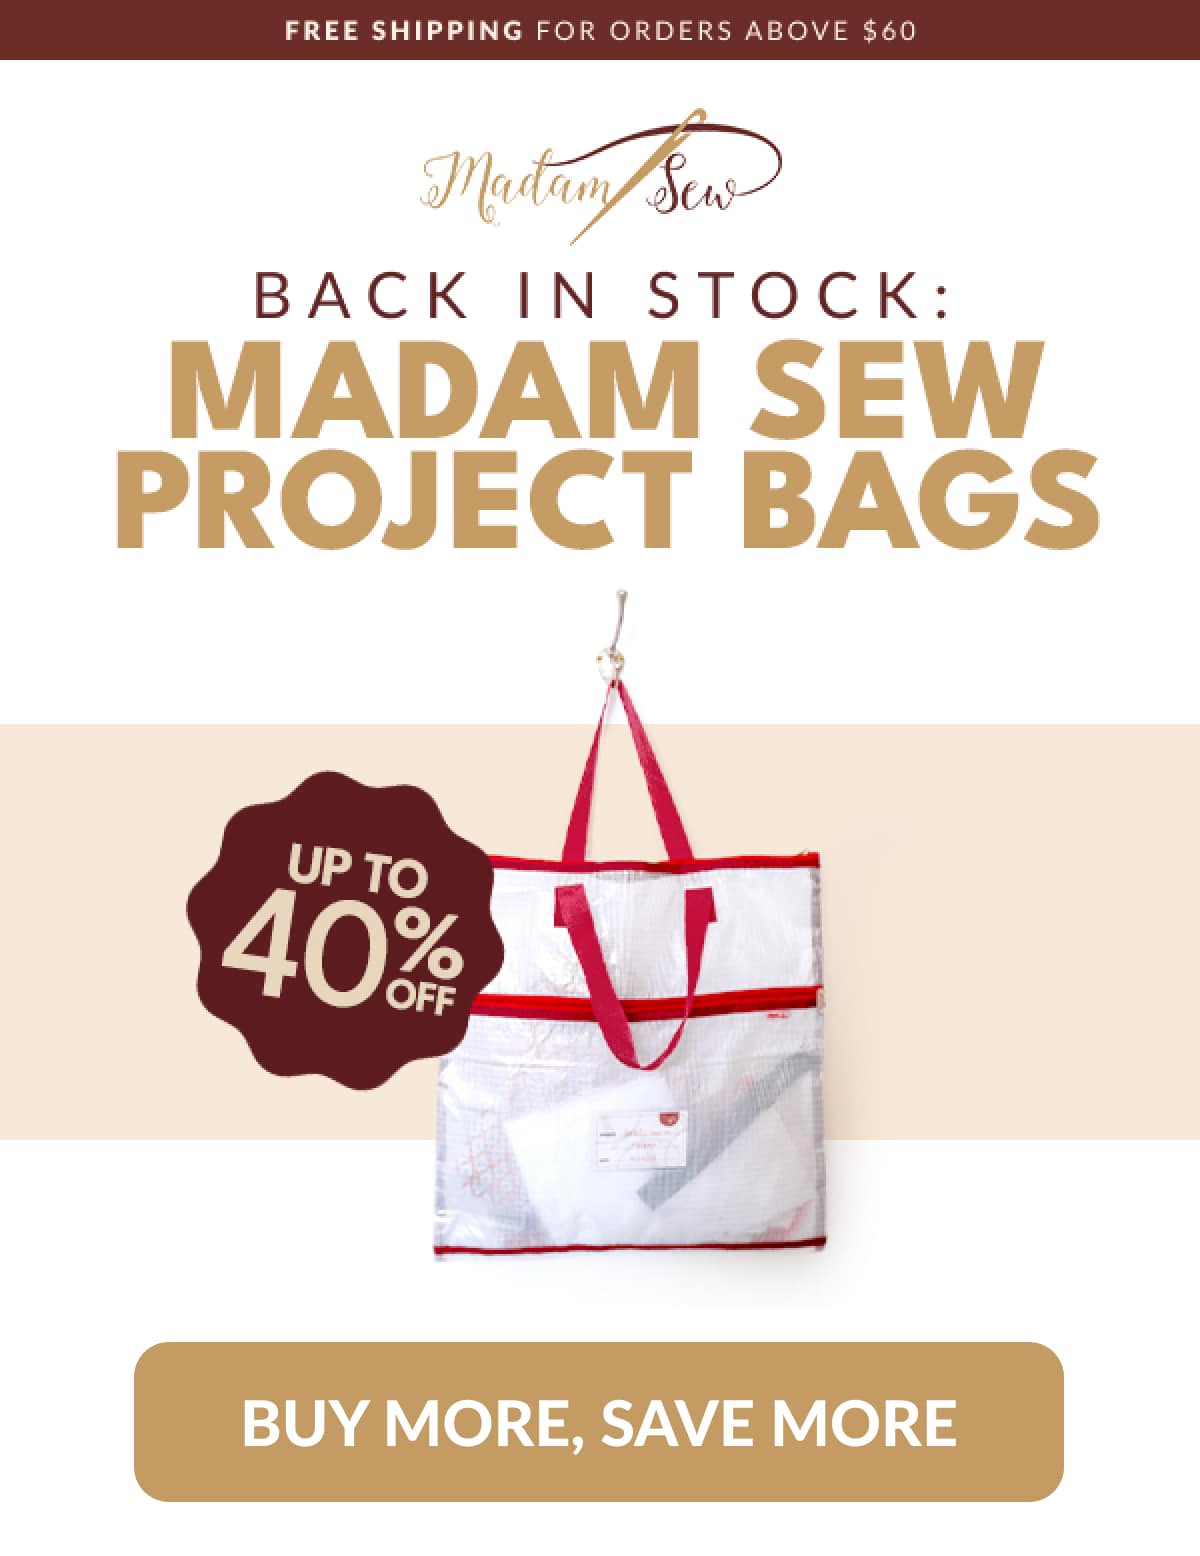 Back in stock: Madam Sew Project Bags